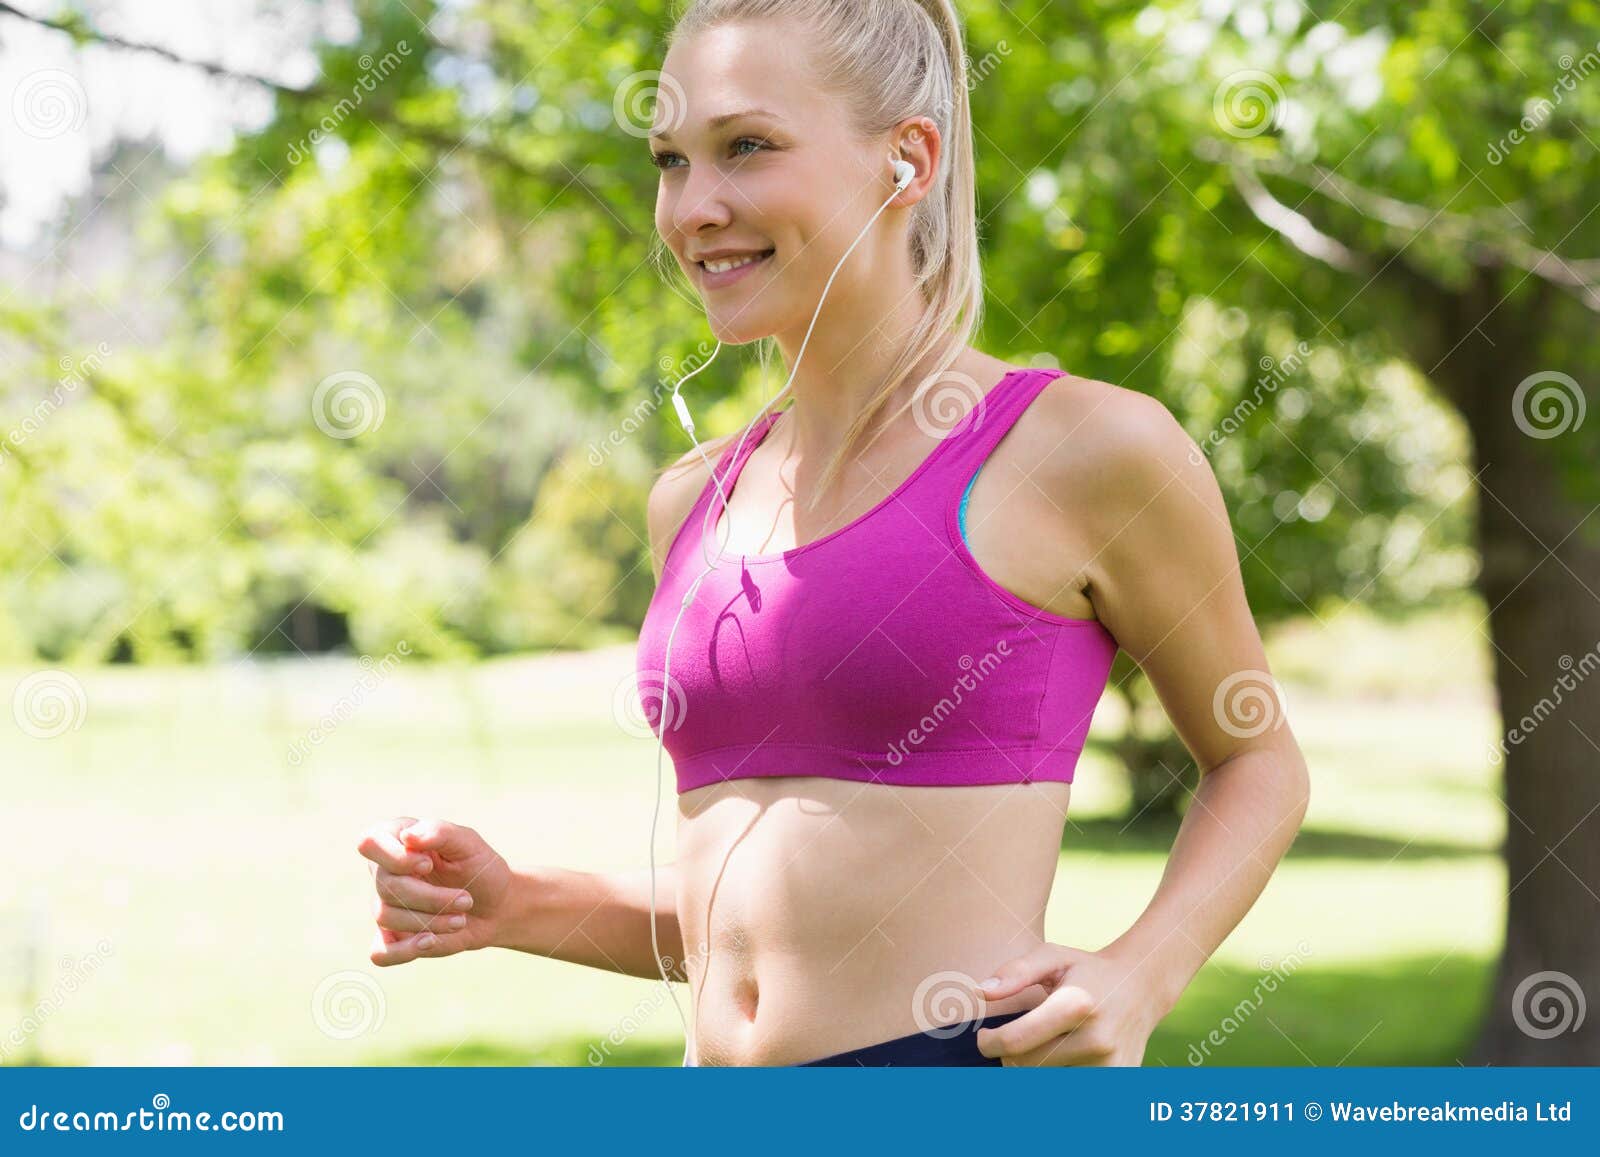 https://thumbs.dreamstime.com/z/healthy-beautiful-young-woman-sports-bra-jogging-park-side-view-37821911.jpg